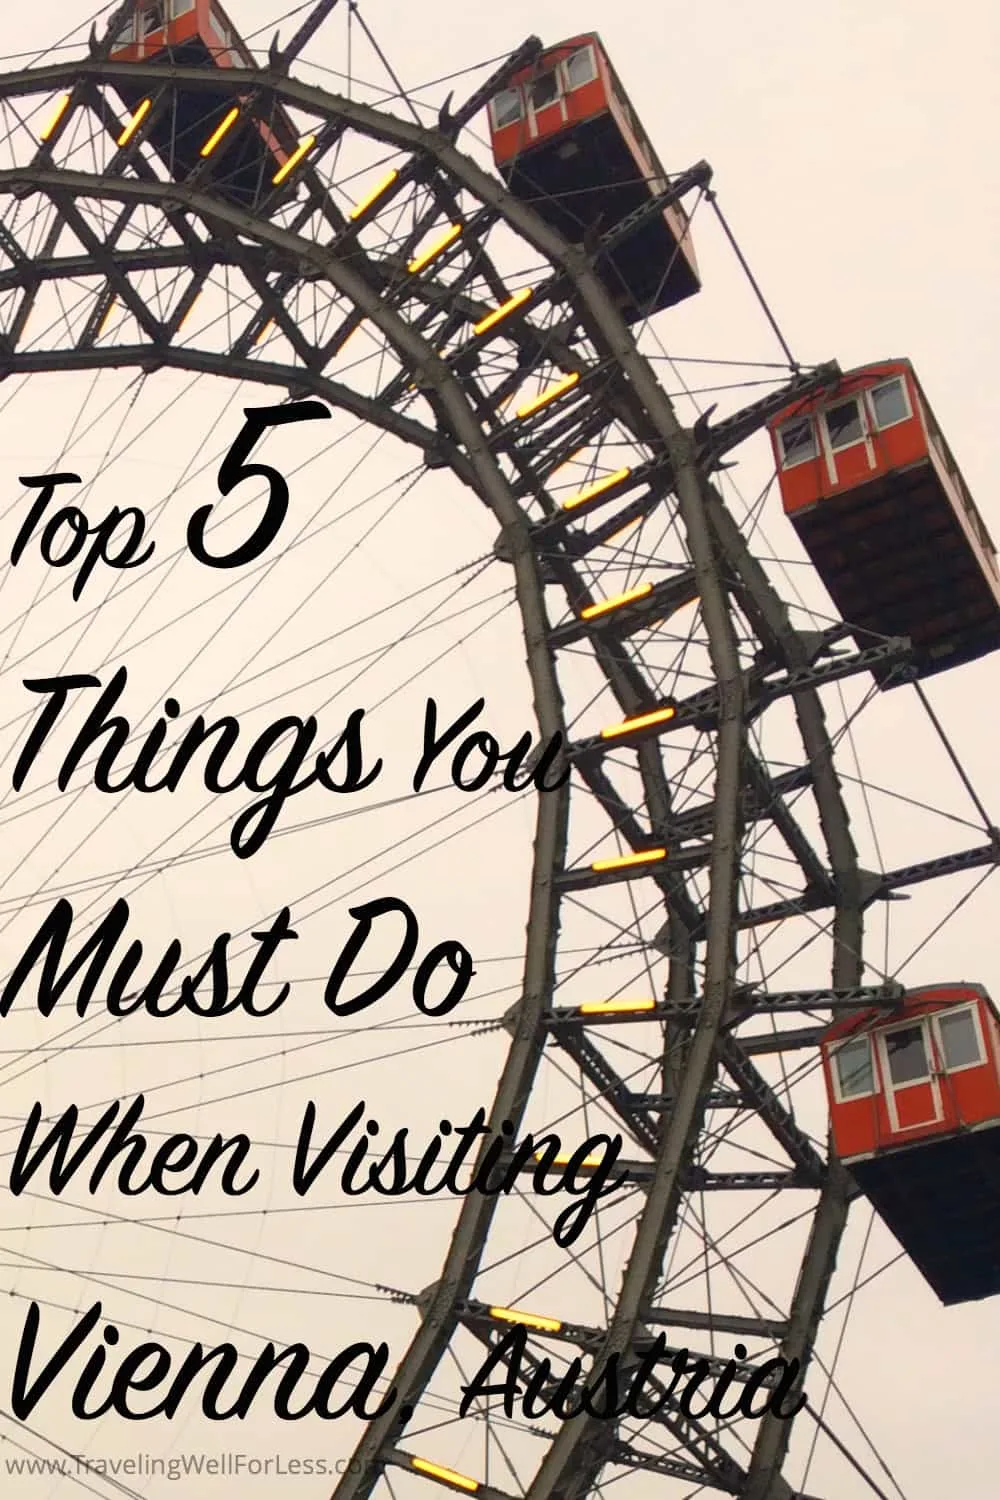 With so much to see and do, there are many top things to do in Vienna.  But we've summed up the top 5 things you should do when you visit Vienna, Austria. | https://www.travelingwellforless.com #thingstodovienna #vienna #austria 